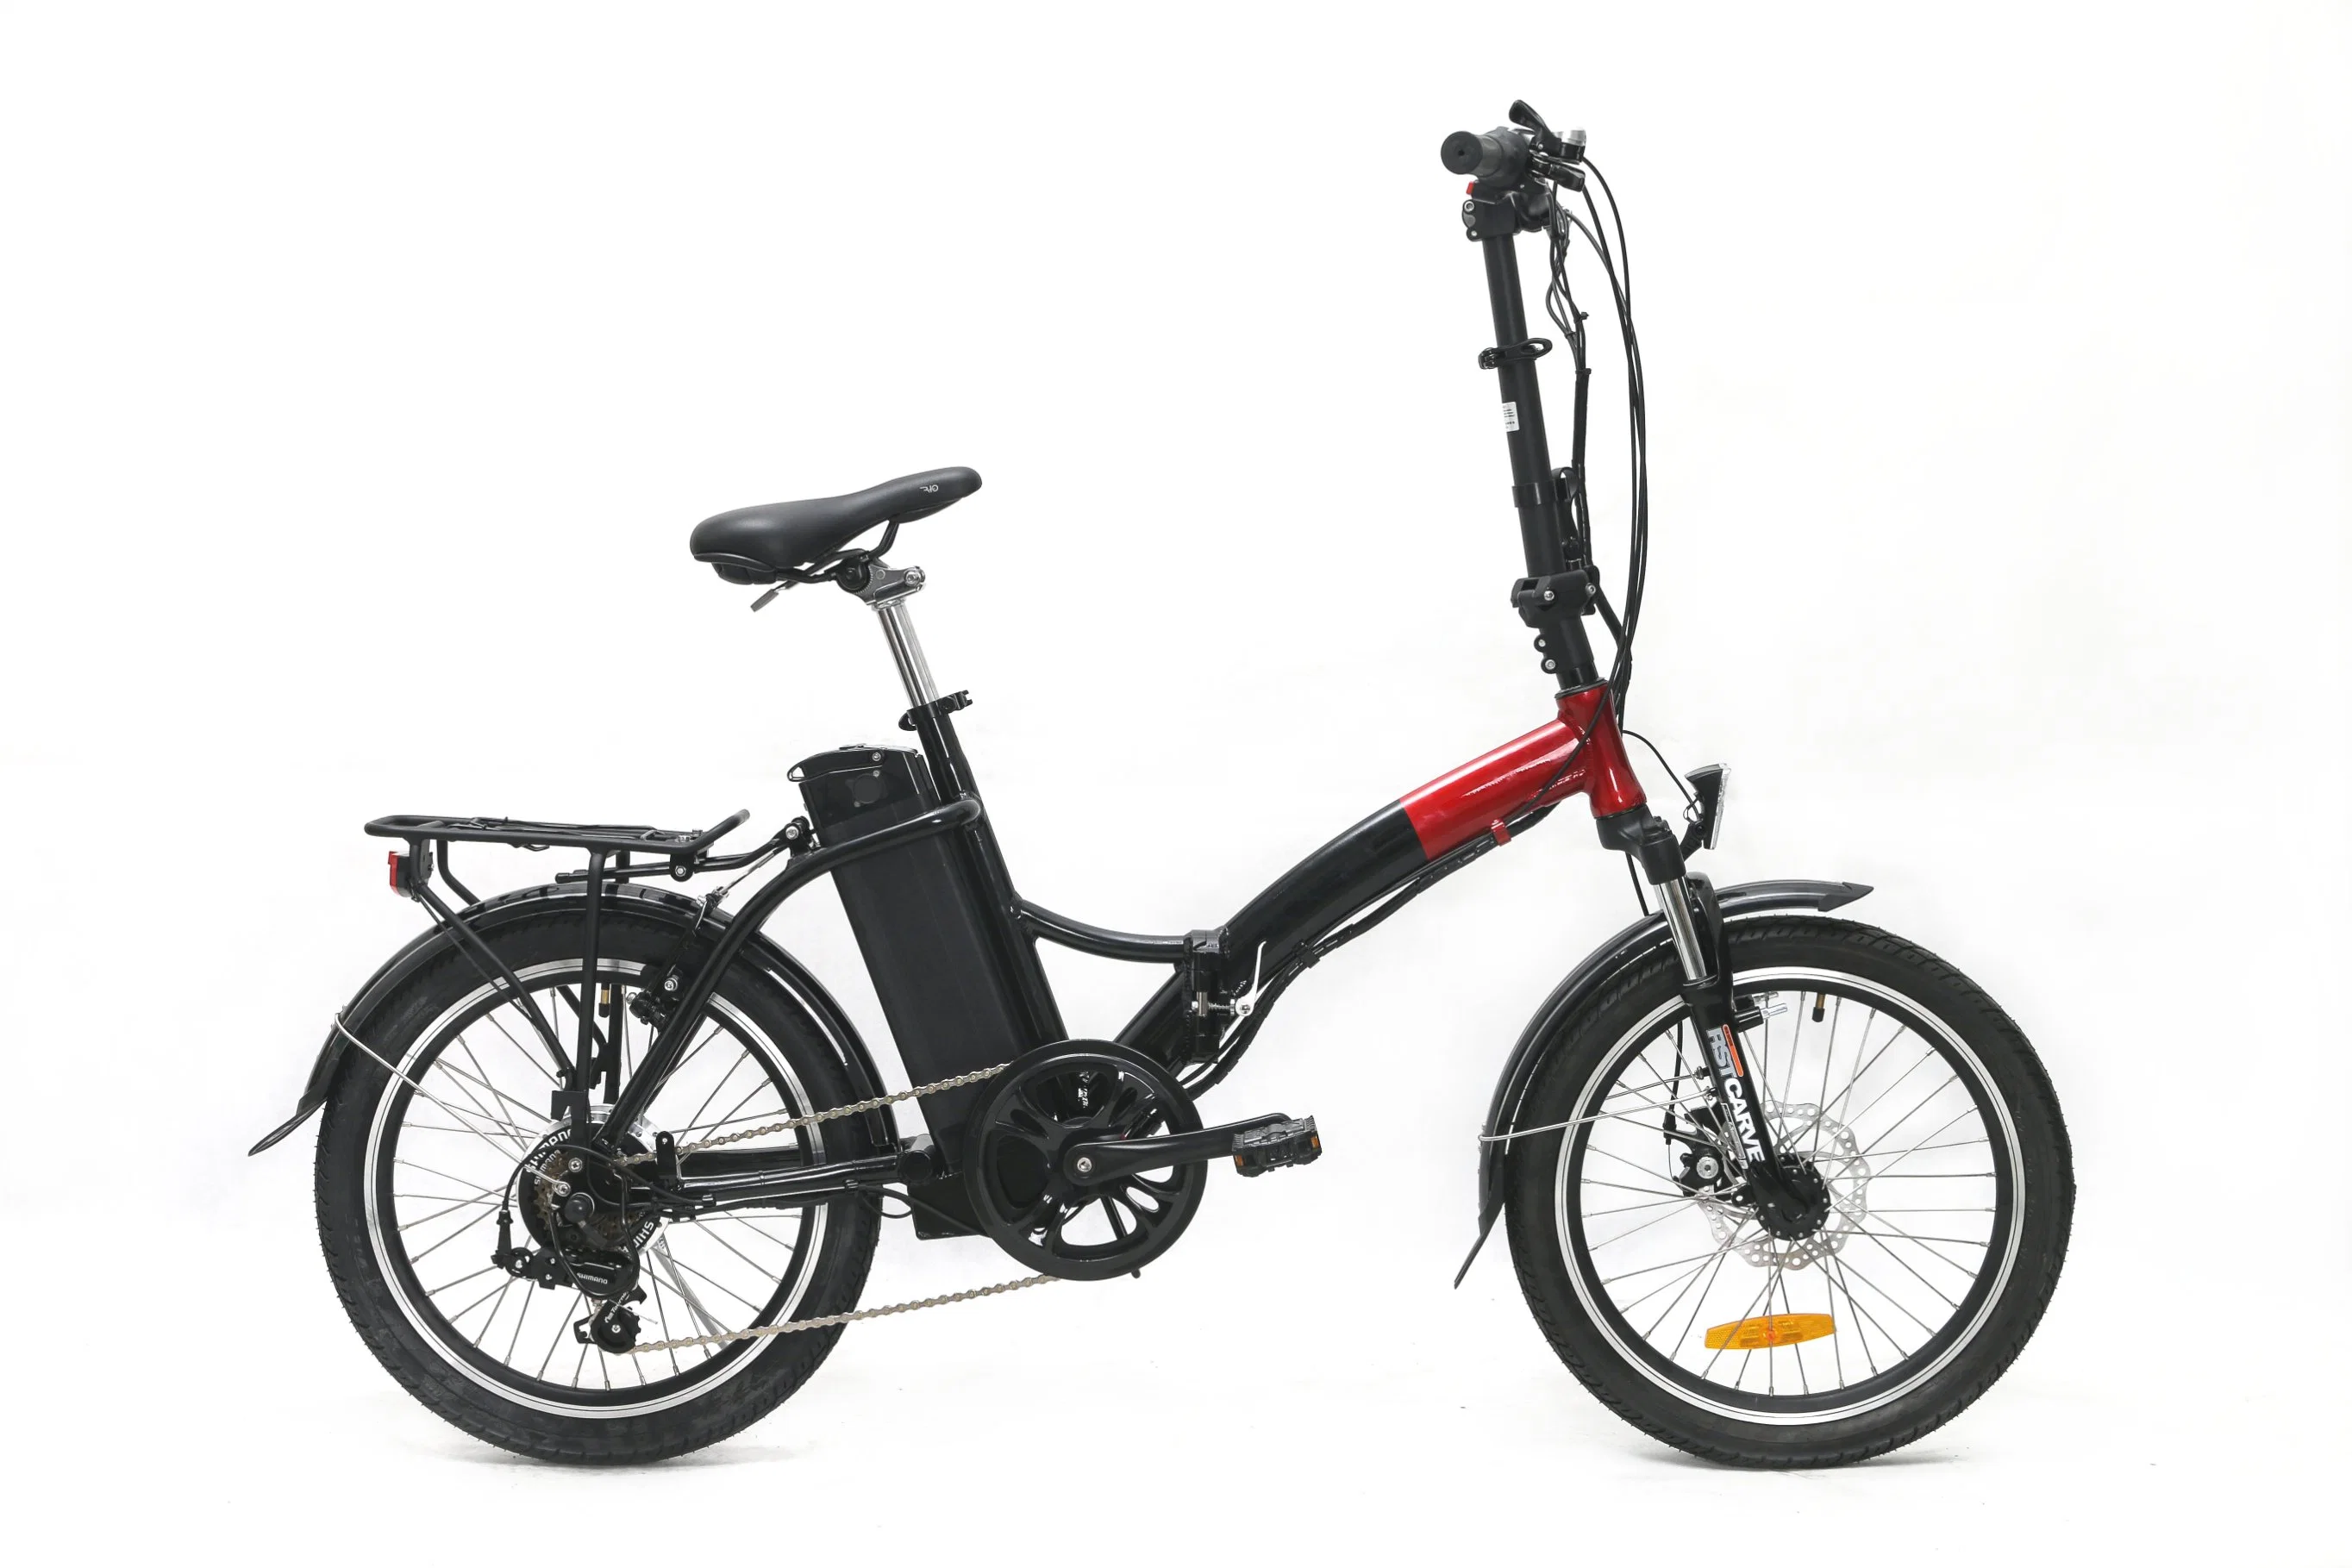 Electric City Folding Bicycle with 36V 250W Motor Warehouse in Europe